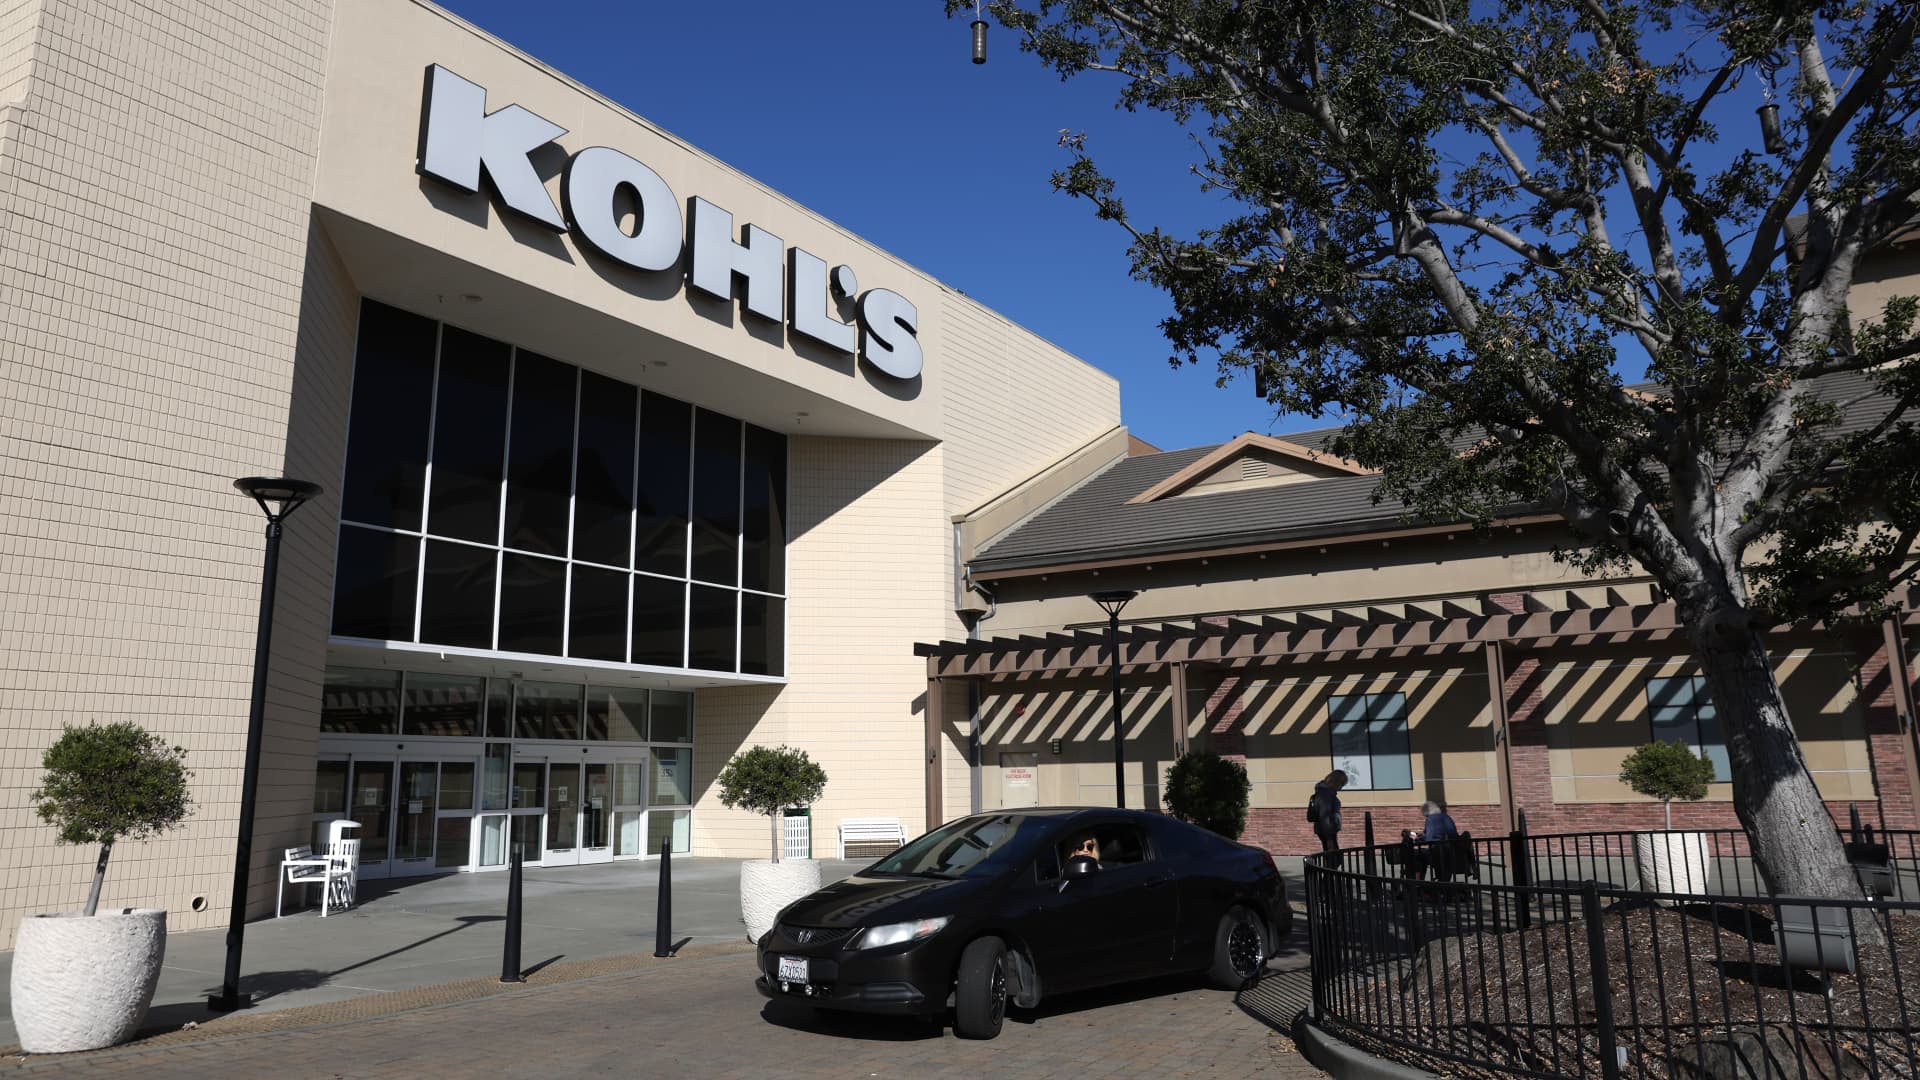 Kohl’s sale negotiations could drag on for weeks, possibly longer, amid market volatility